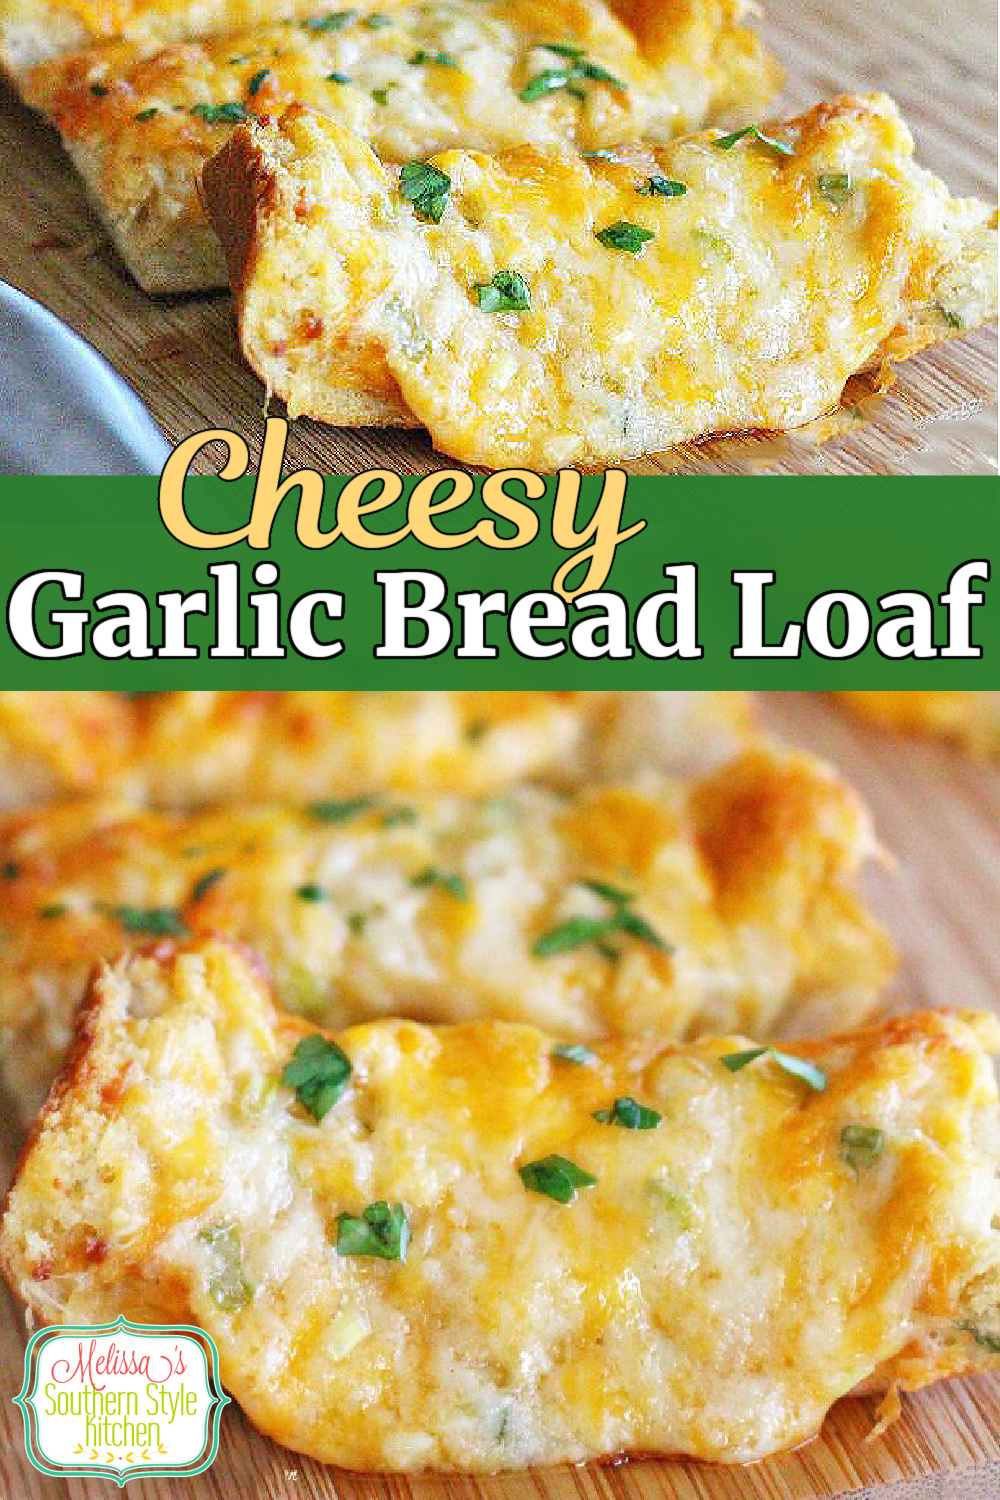 Ooey gooey delicious Cheesy Garlic Bread Loaf can be served as an appetizer or a side dish #galicbread #cheesebread #breadrecipes #appetizers #sidedishes #cheese #garlicbread #southernfood #southernrecipes